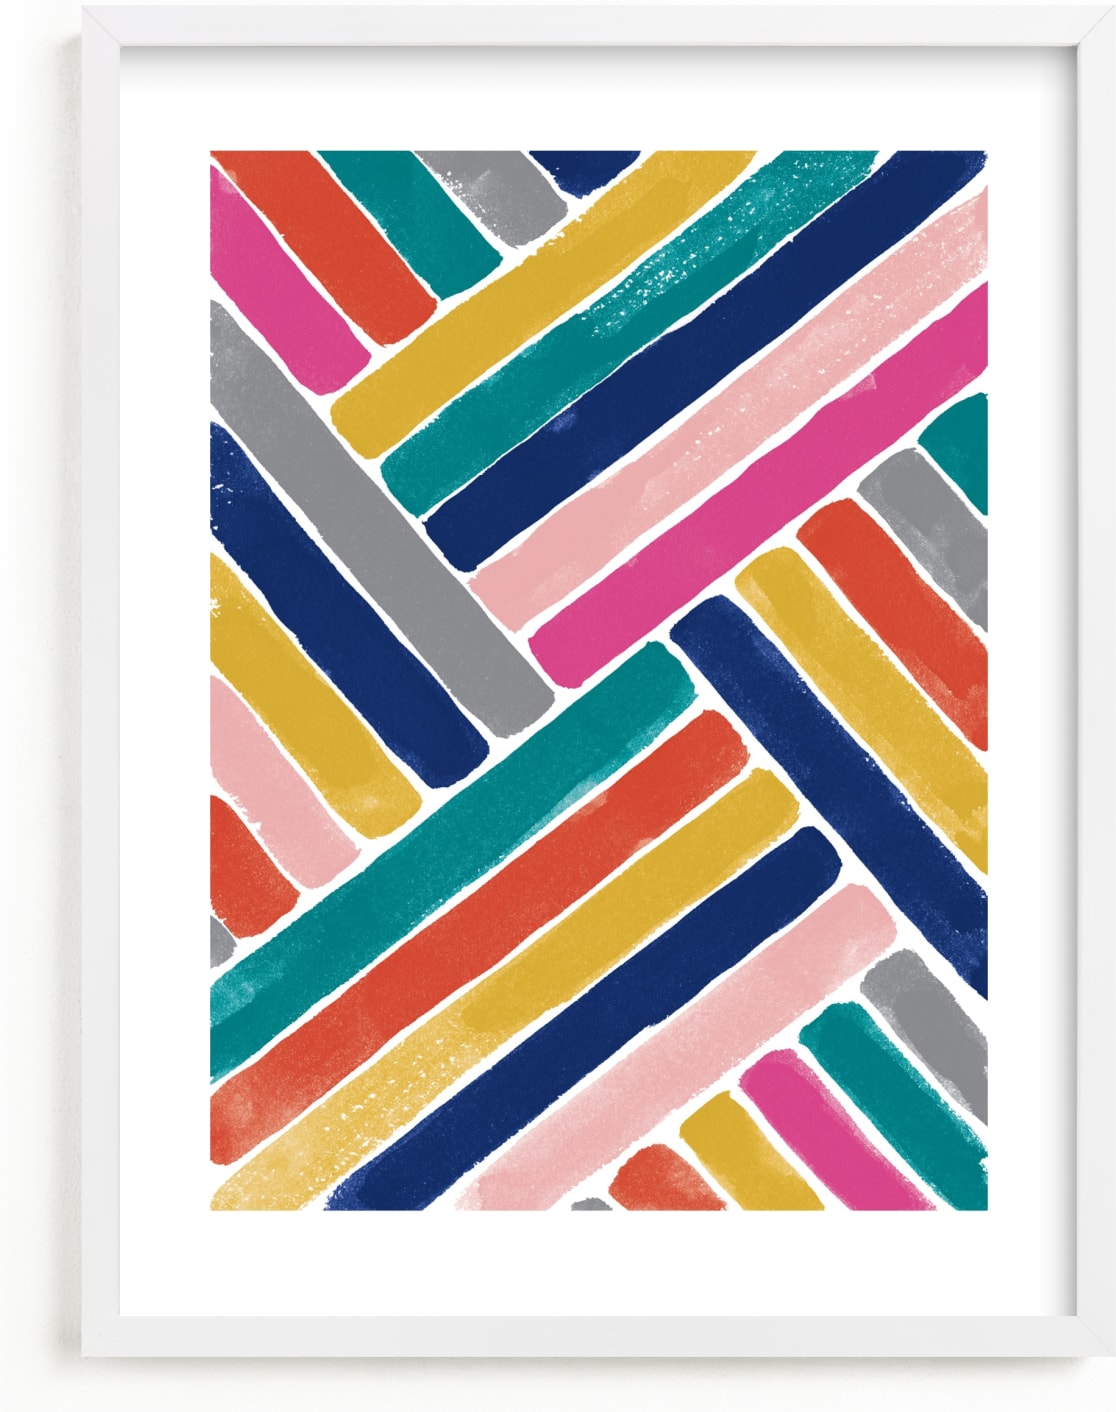 This is a colorful kids wall art by Stardust Design Studio called Crossroads.